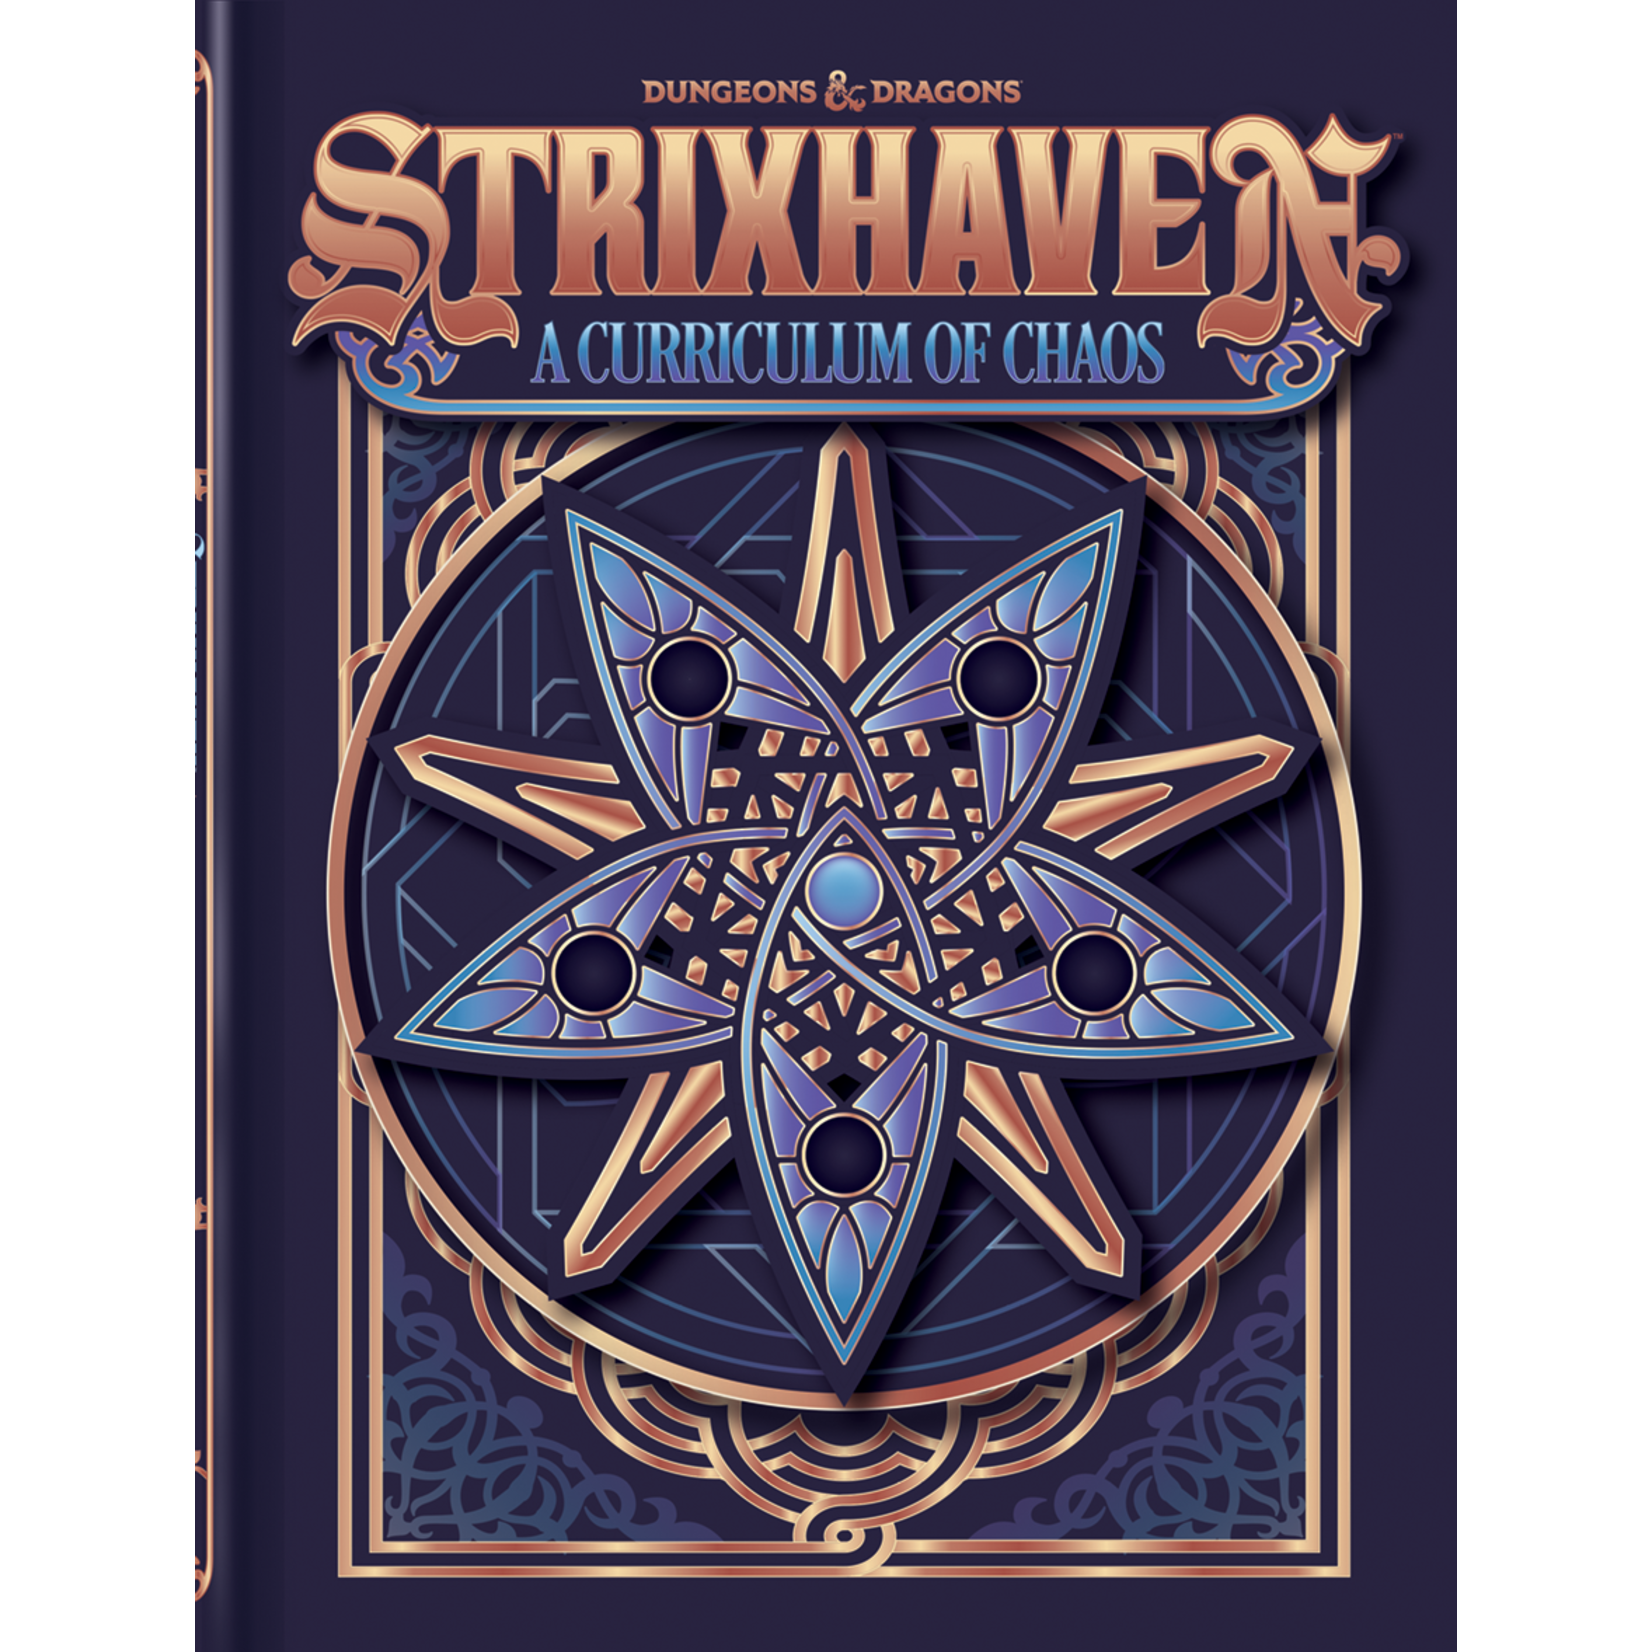 Dungeons & Dragons Dungeons & Dragons – Strixhaven: A Curriculum of Chaos (5th Edition, Alternate Cover)